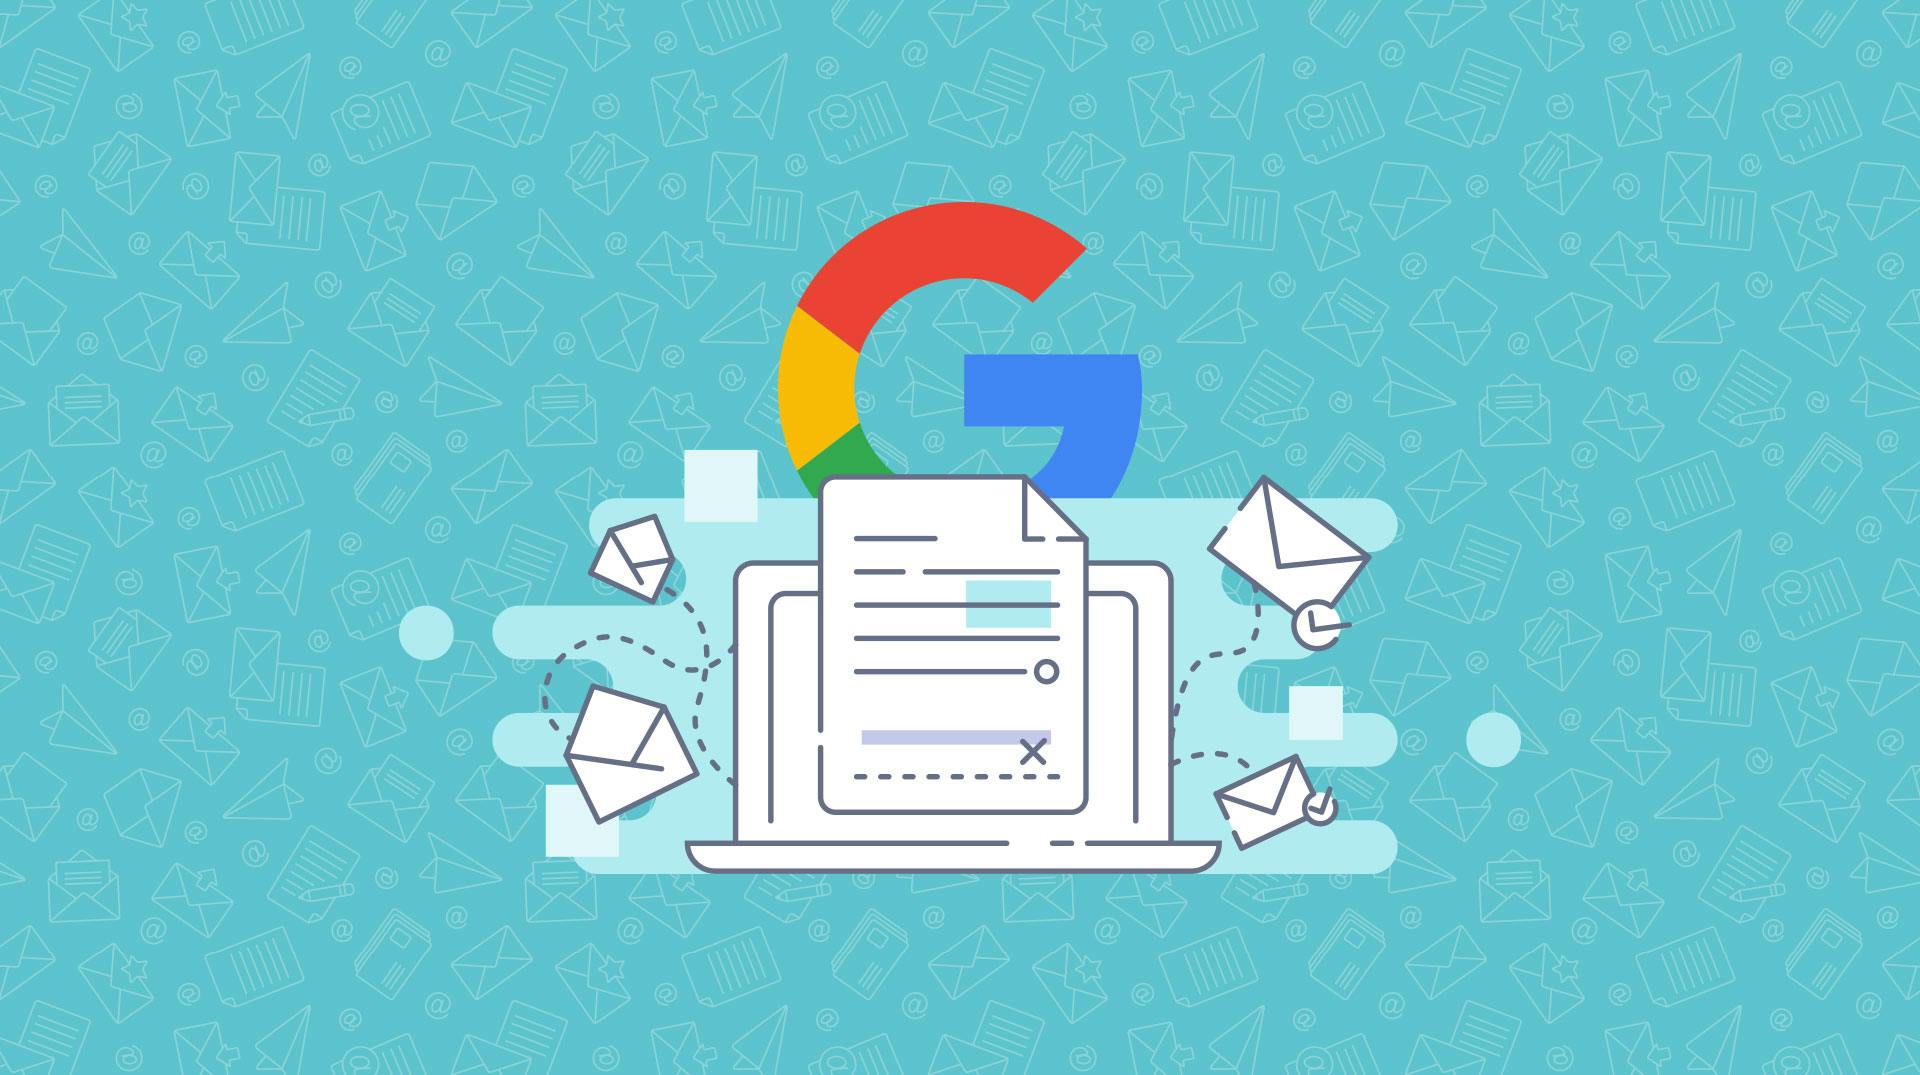 The benefits of switching your emails over to G Suite Insight